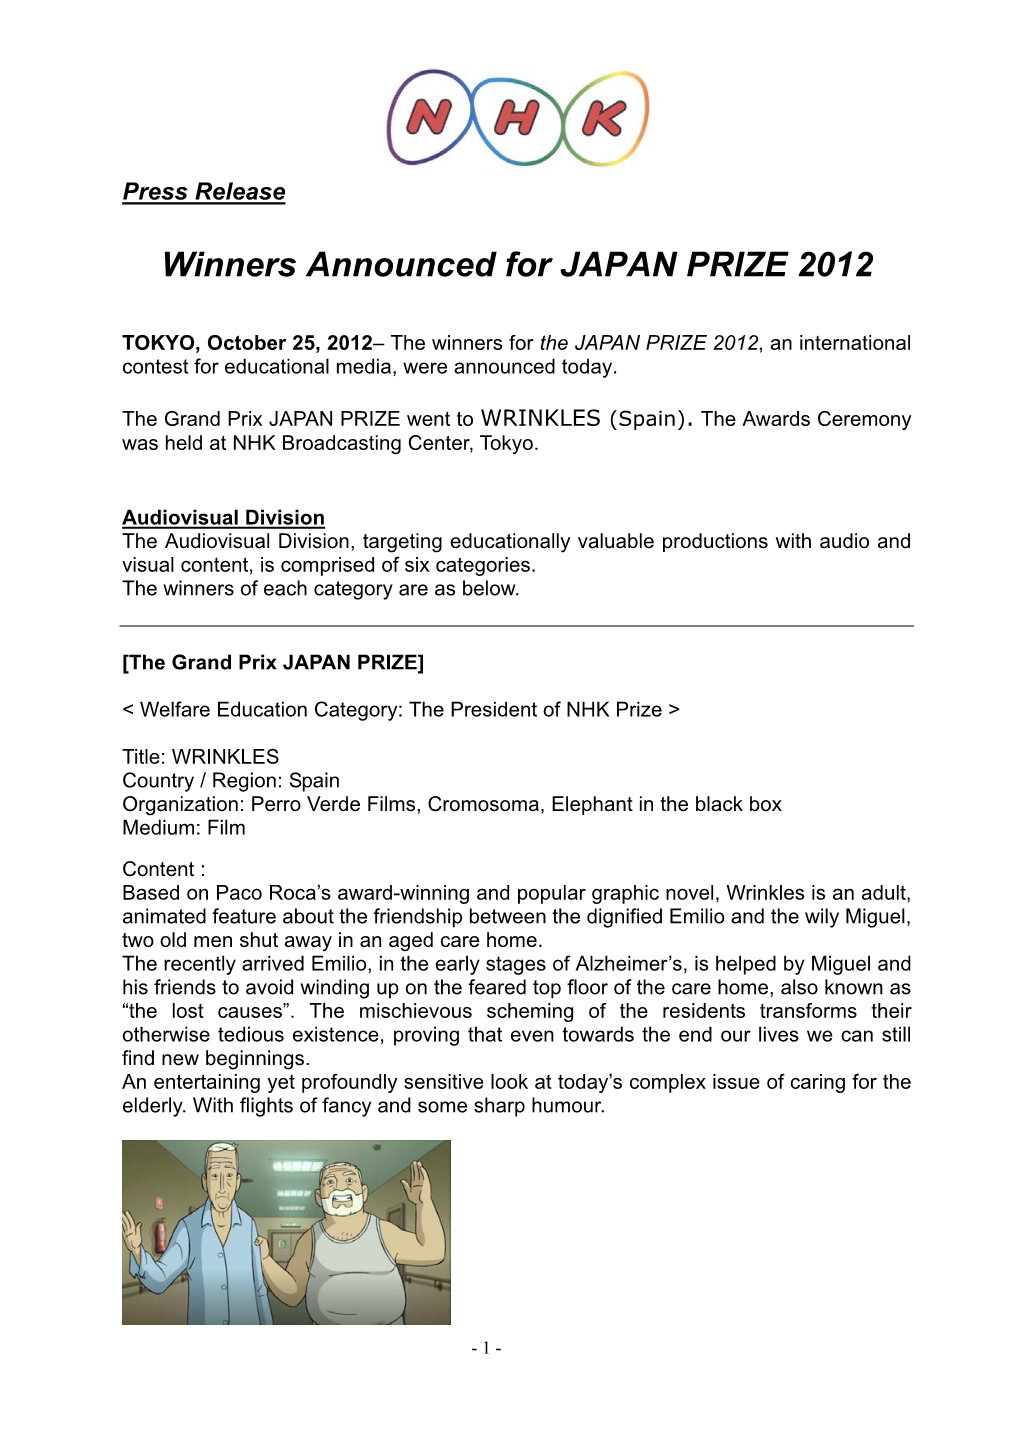 Winners Announced for JAPAN PRIZE 2012